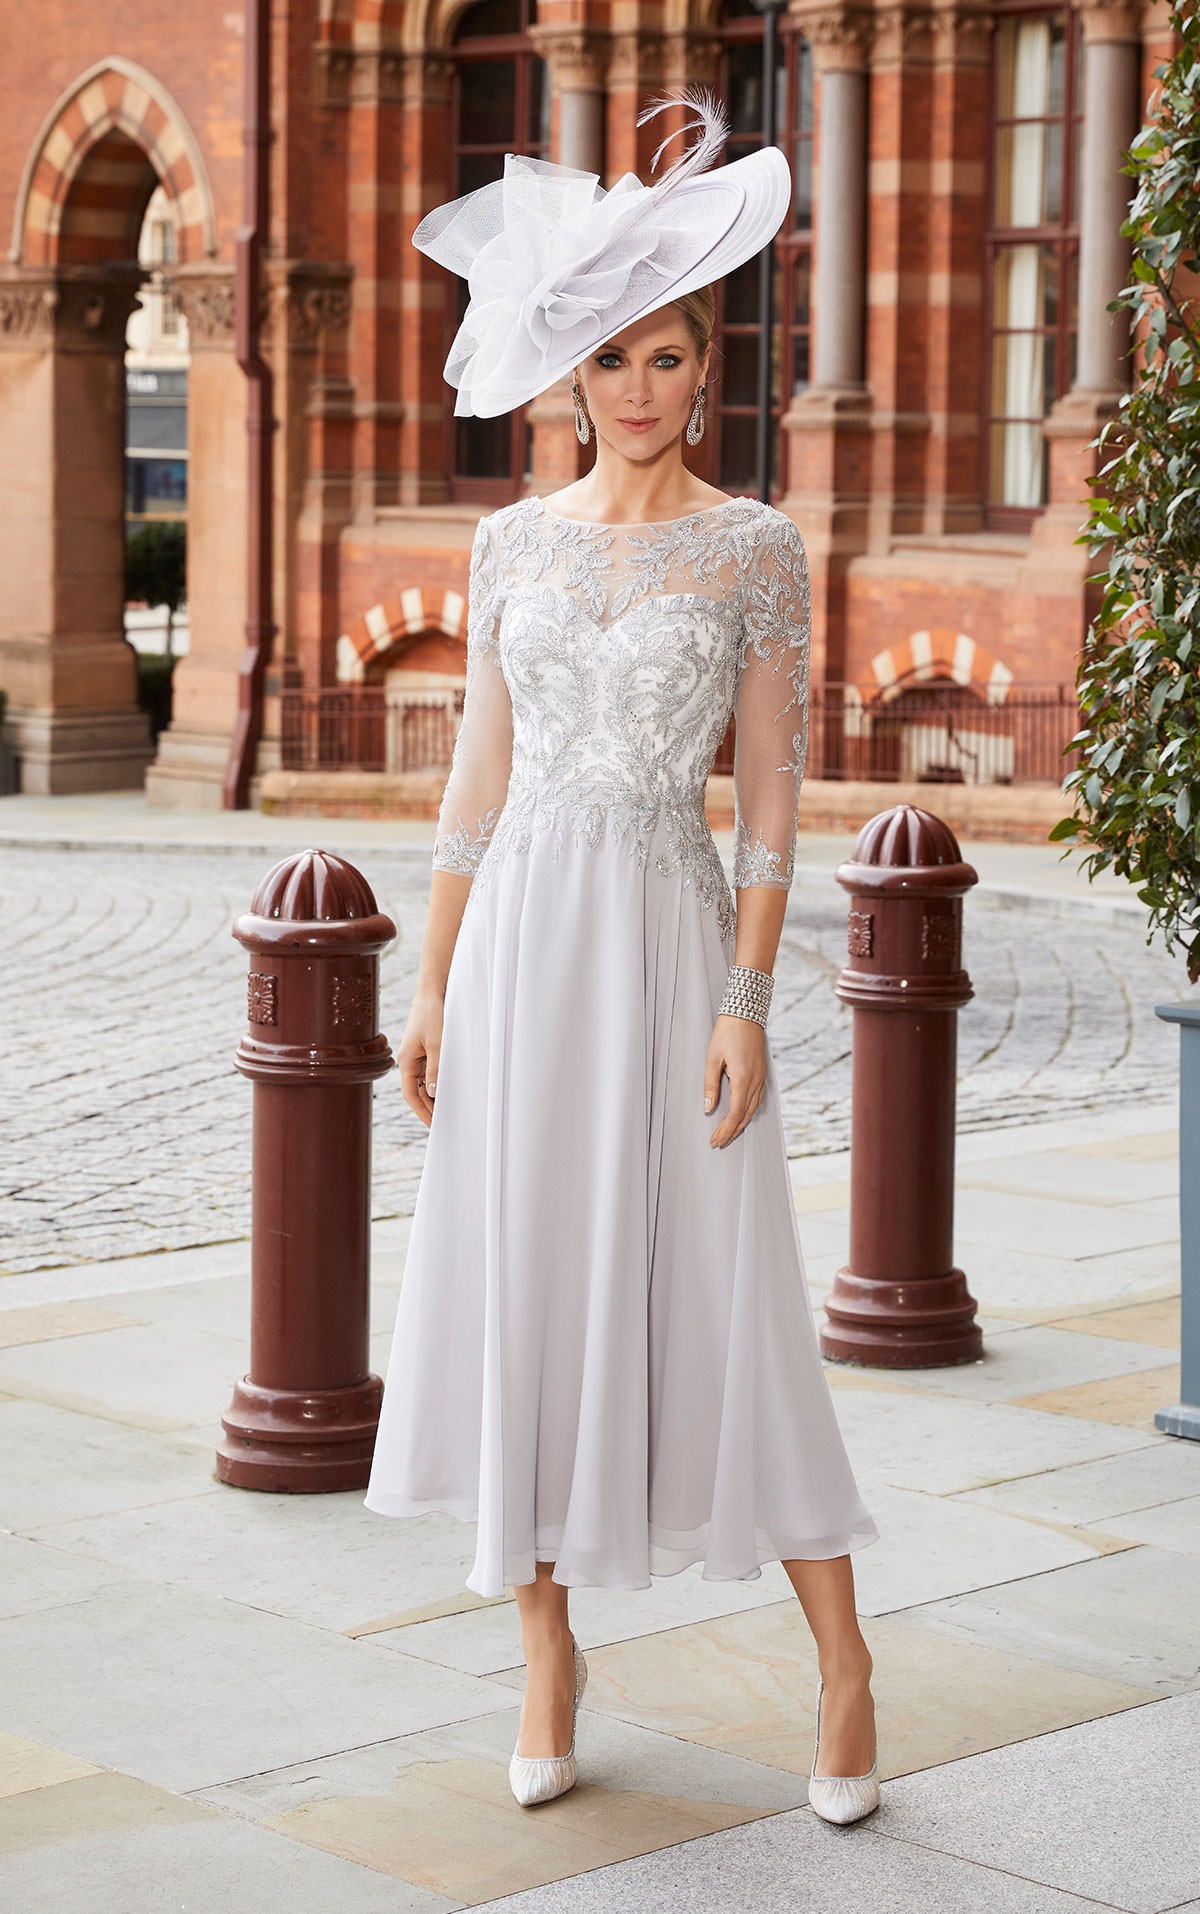 Veni Infantino 991819 - Size 10 - Veni Infantino 991819, Chiffon & beaded lace A-line dress  with sleeves - Mother of the Bride & Mature Bride collections at Occasions at Blessings Loyal Parade, Mill Rise, Westdene,  Brighton. BN1 5GG T: 01273 505766 E: info@blessingsbridal.co.uk